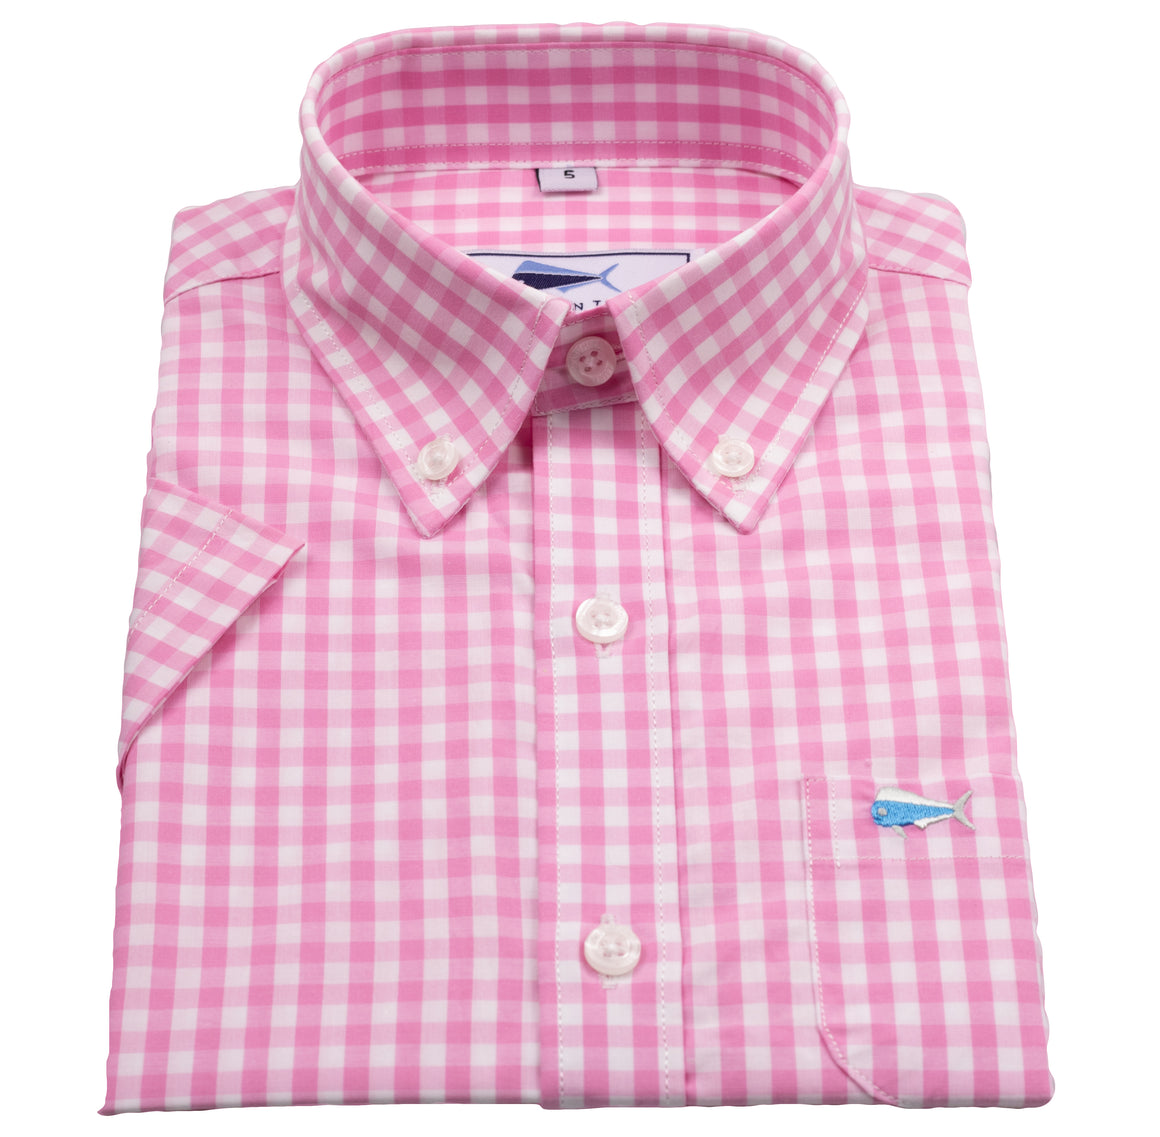 Youth & Toddler Short Sleeve Woven Sport Shirt - Pink Gingham